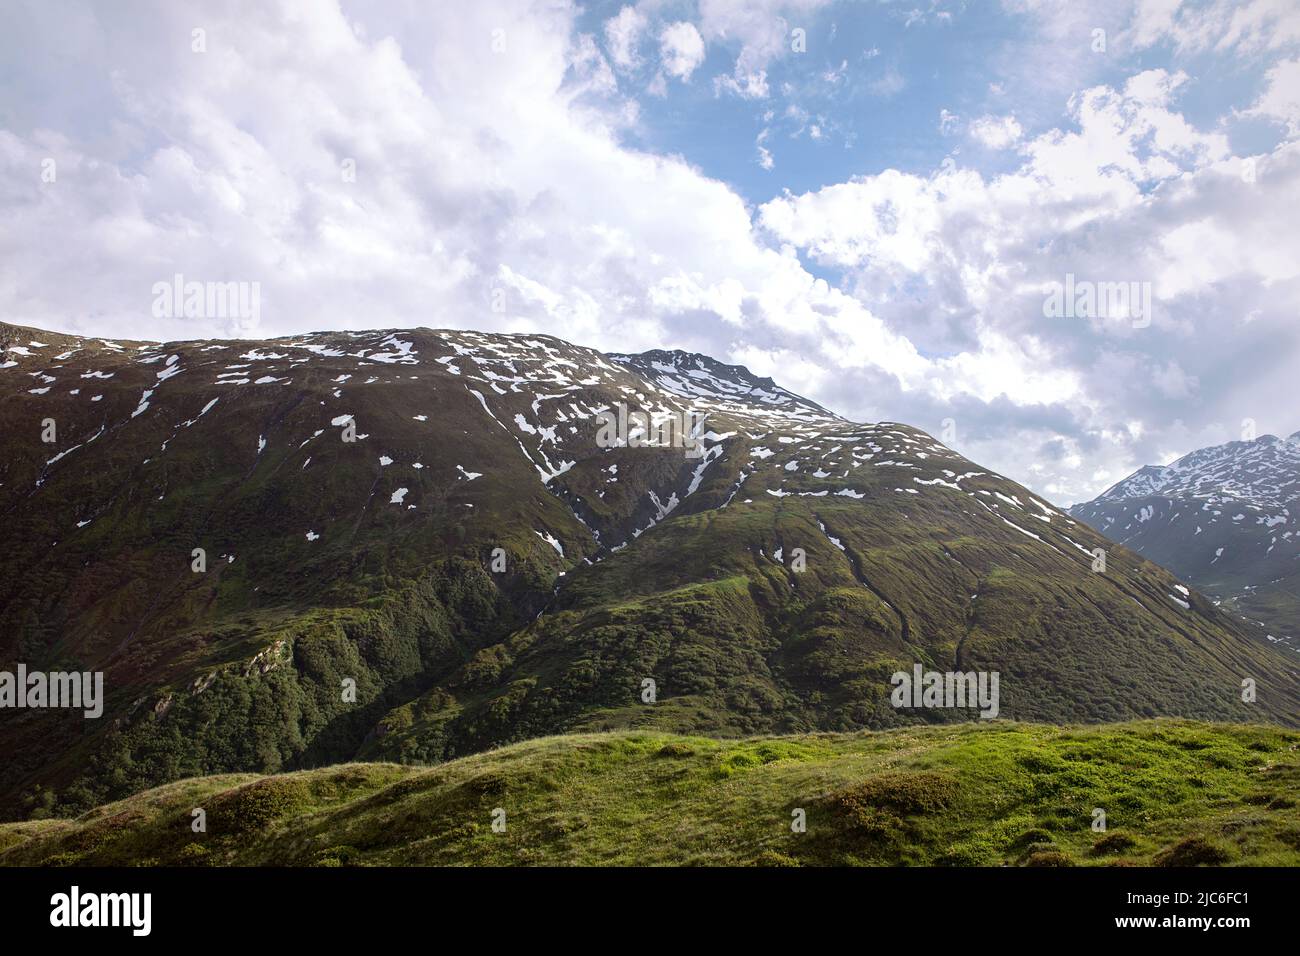 Juicy green grass and dense vegetation on a slope of a mountain with snow patches. Paterns and textures on high mount. Stock Photo